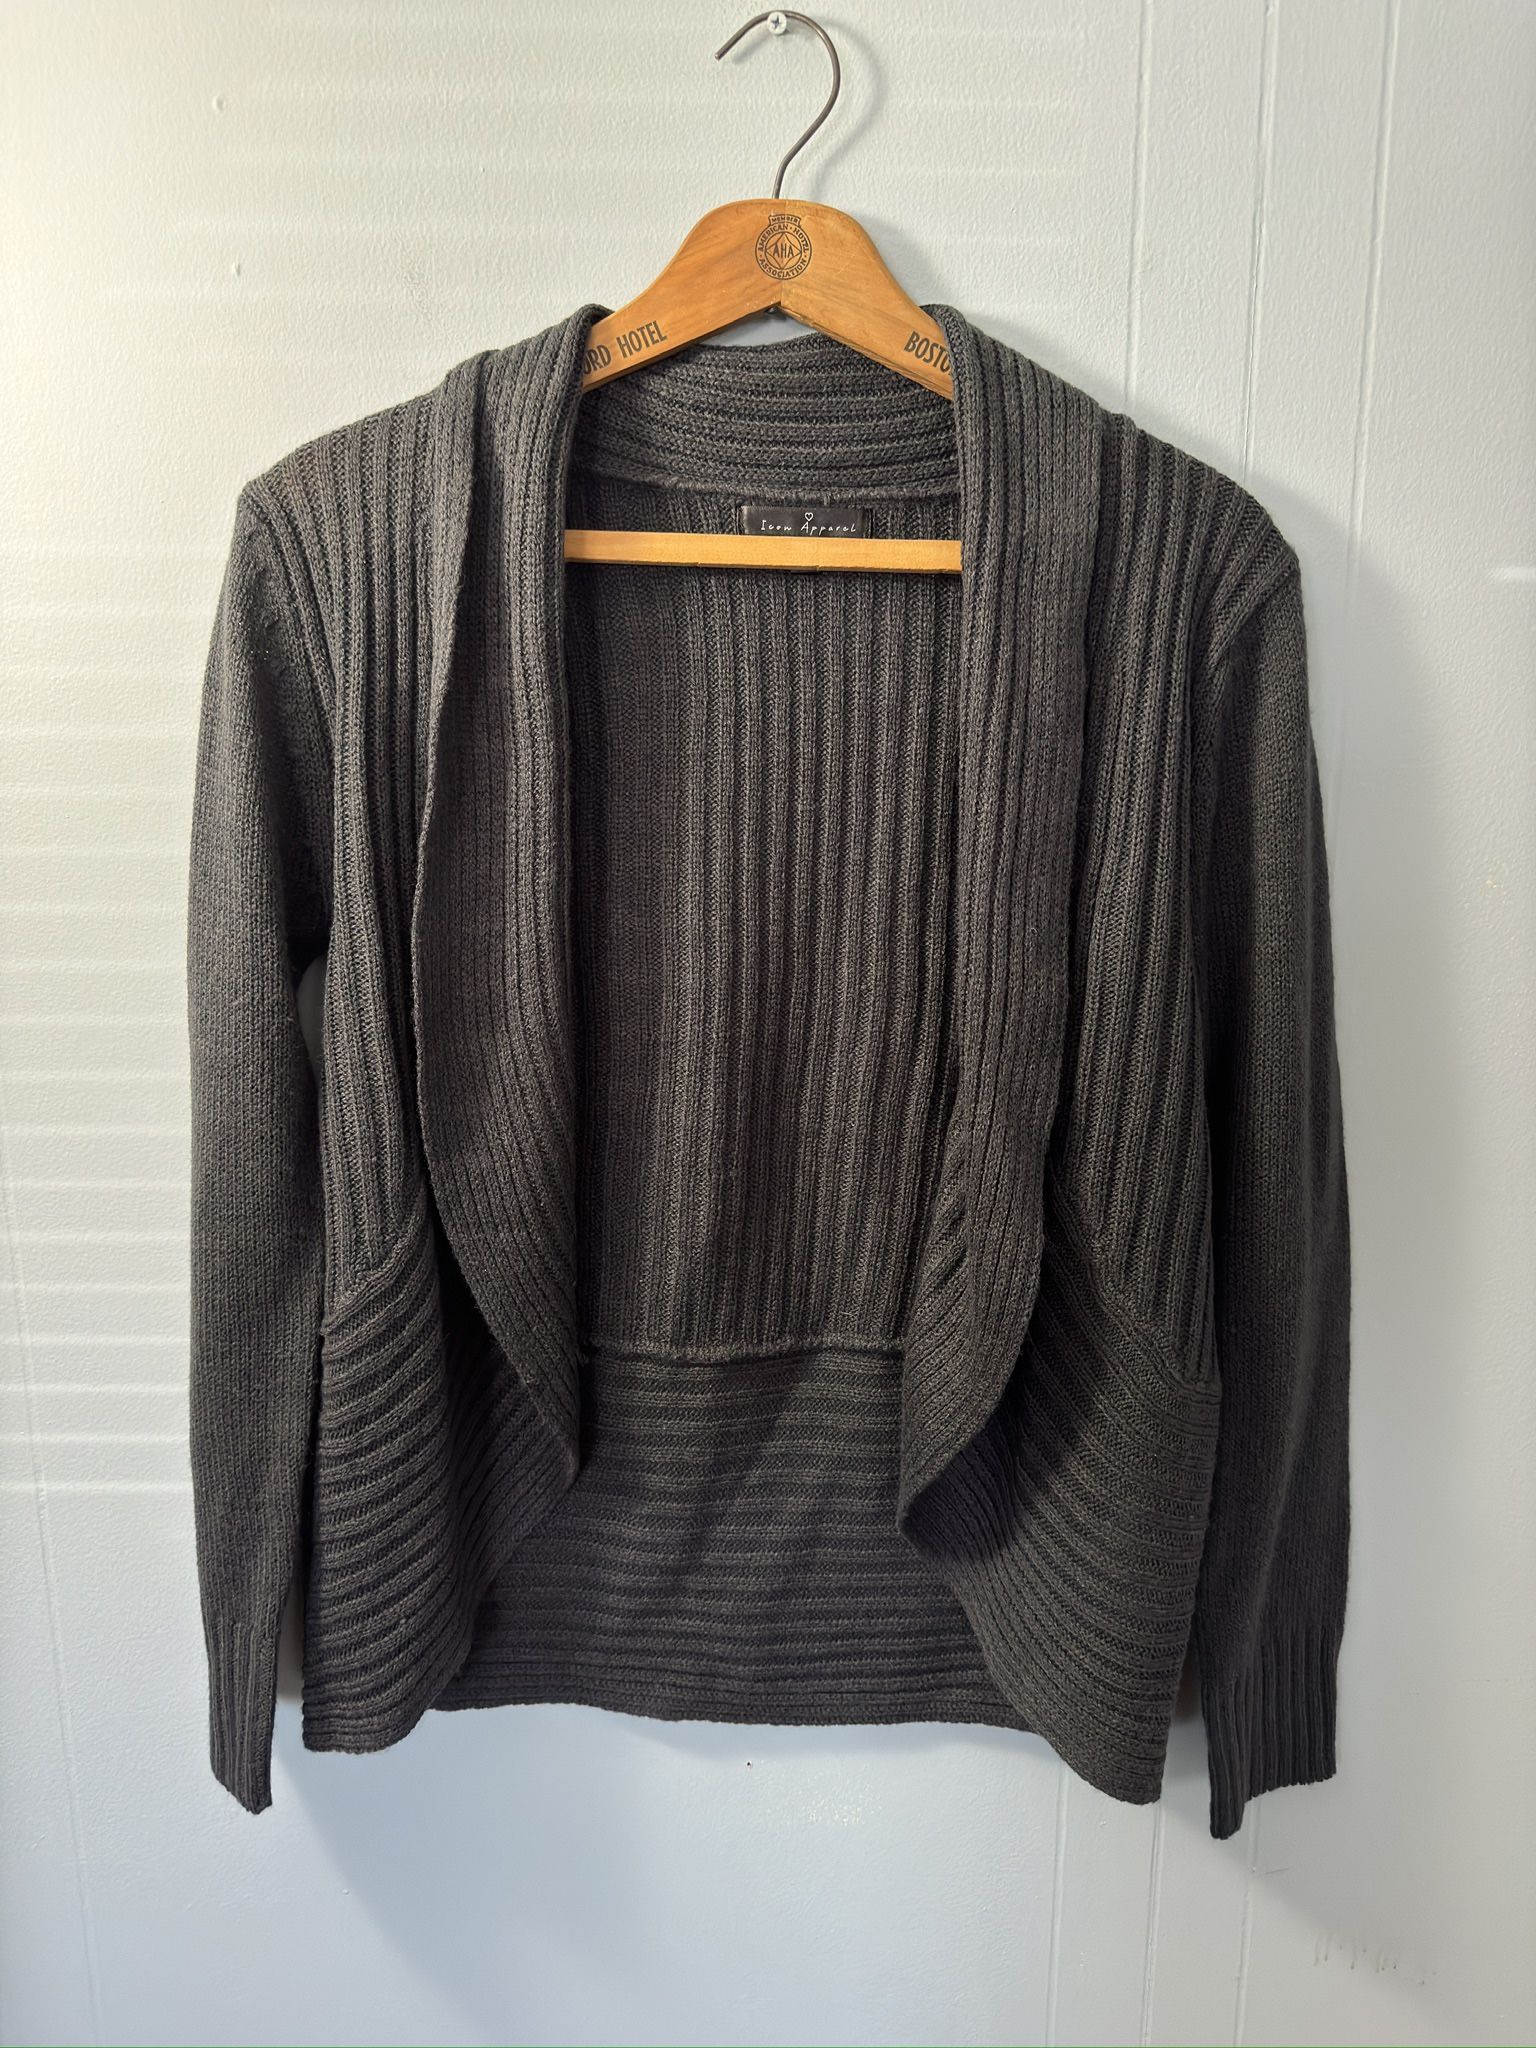 Icon Apparel Gray Knit Cardigan Sweater. Size Small. 